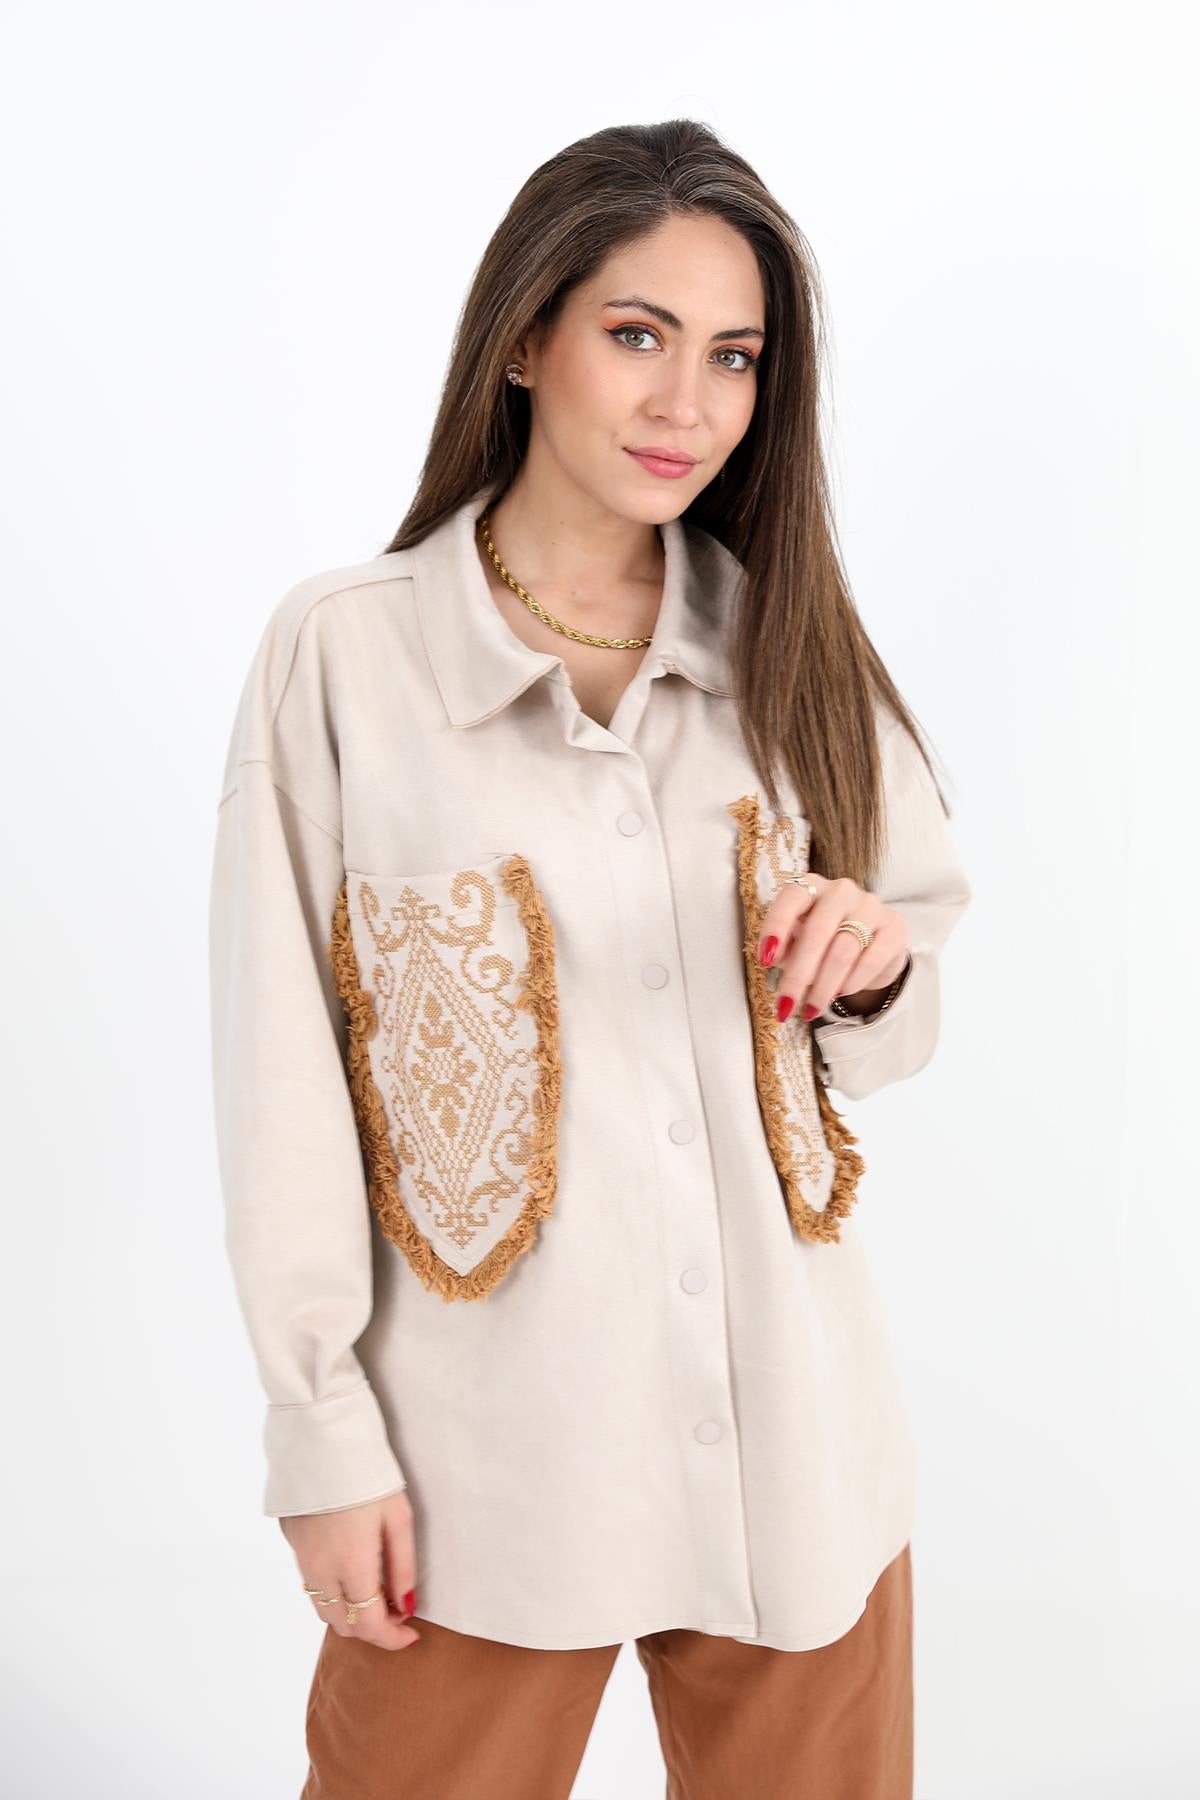 Women's Shirt Pocket Tasseled Embroidered Suede - Stone - STREETMODE™